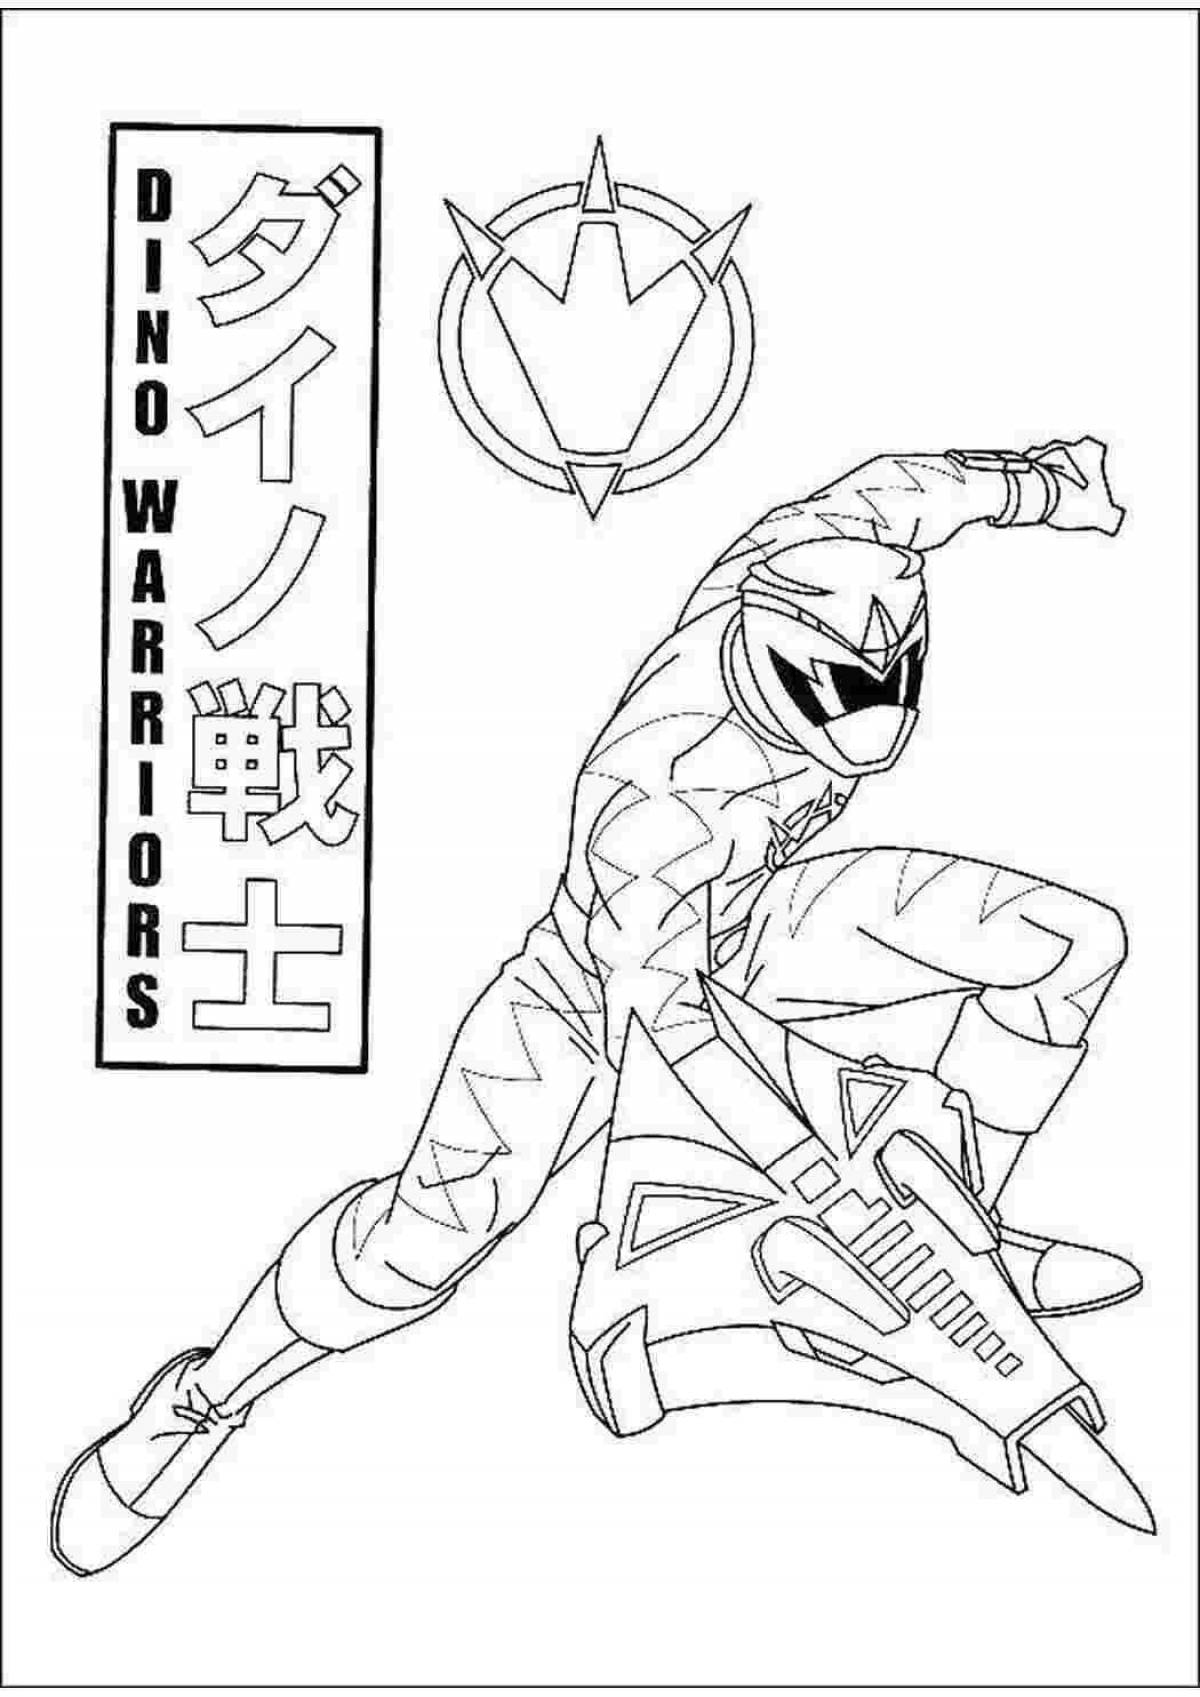 Exciting roger ranger coloring page